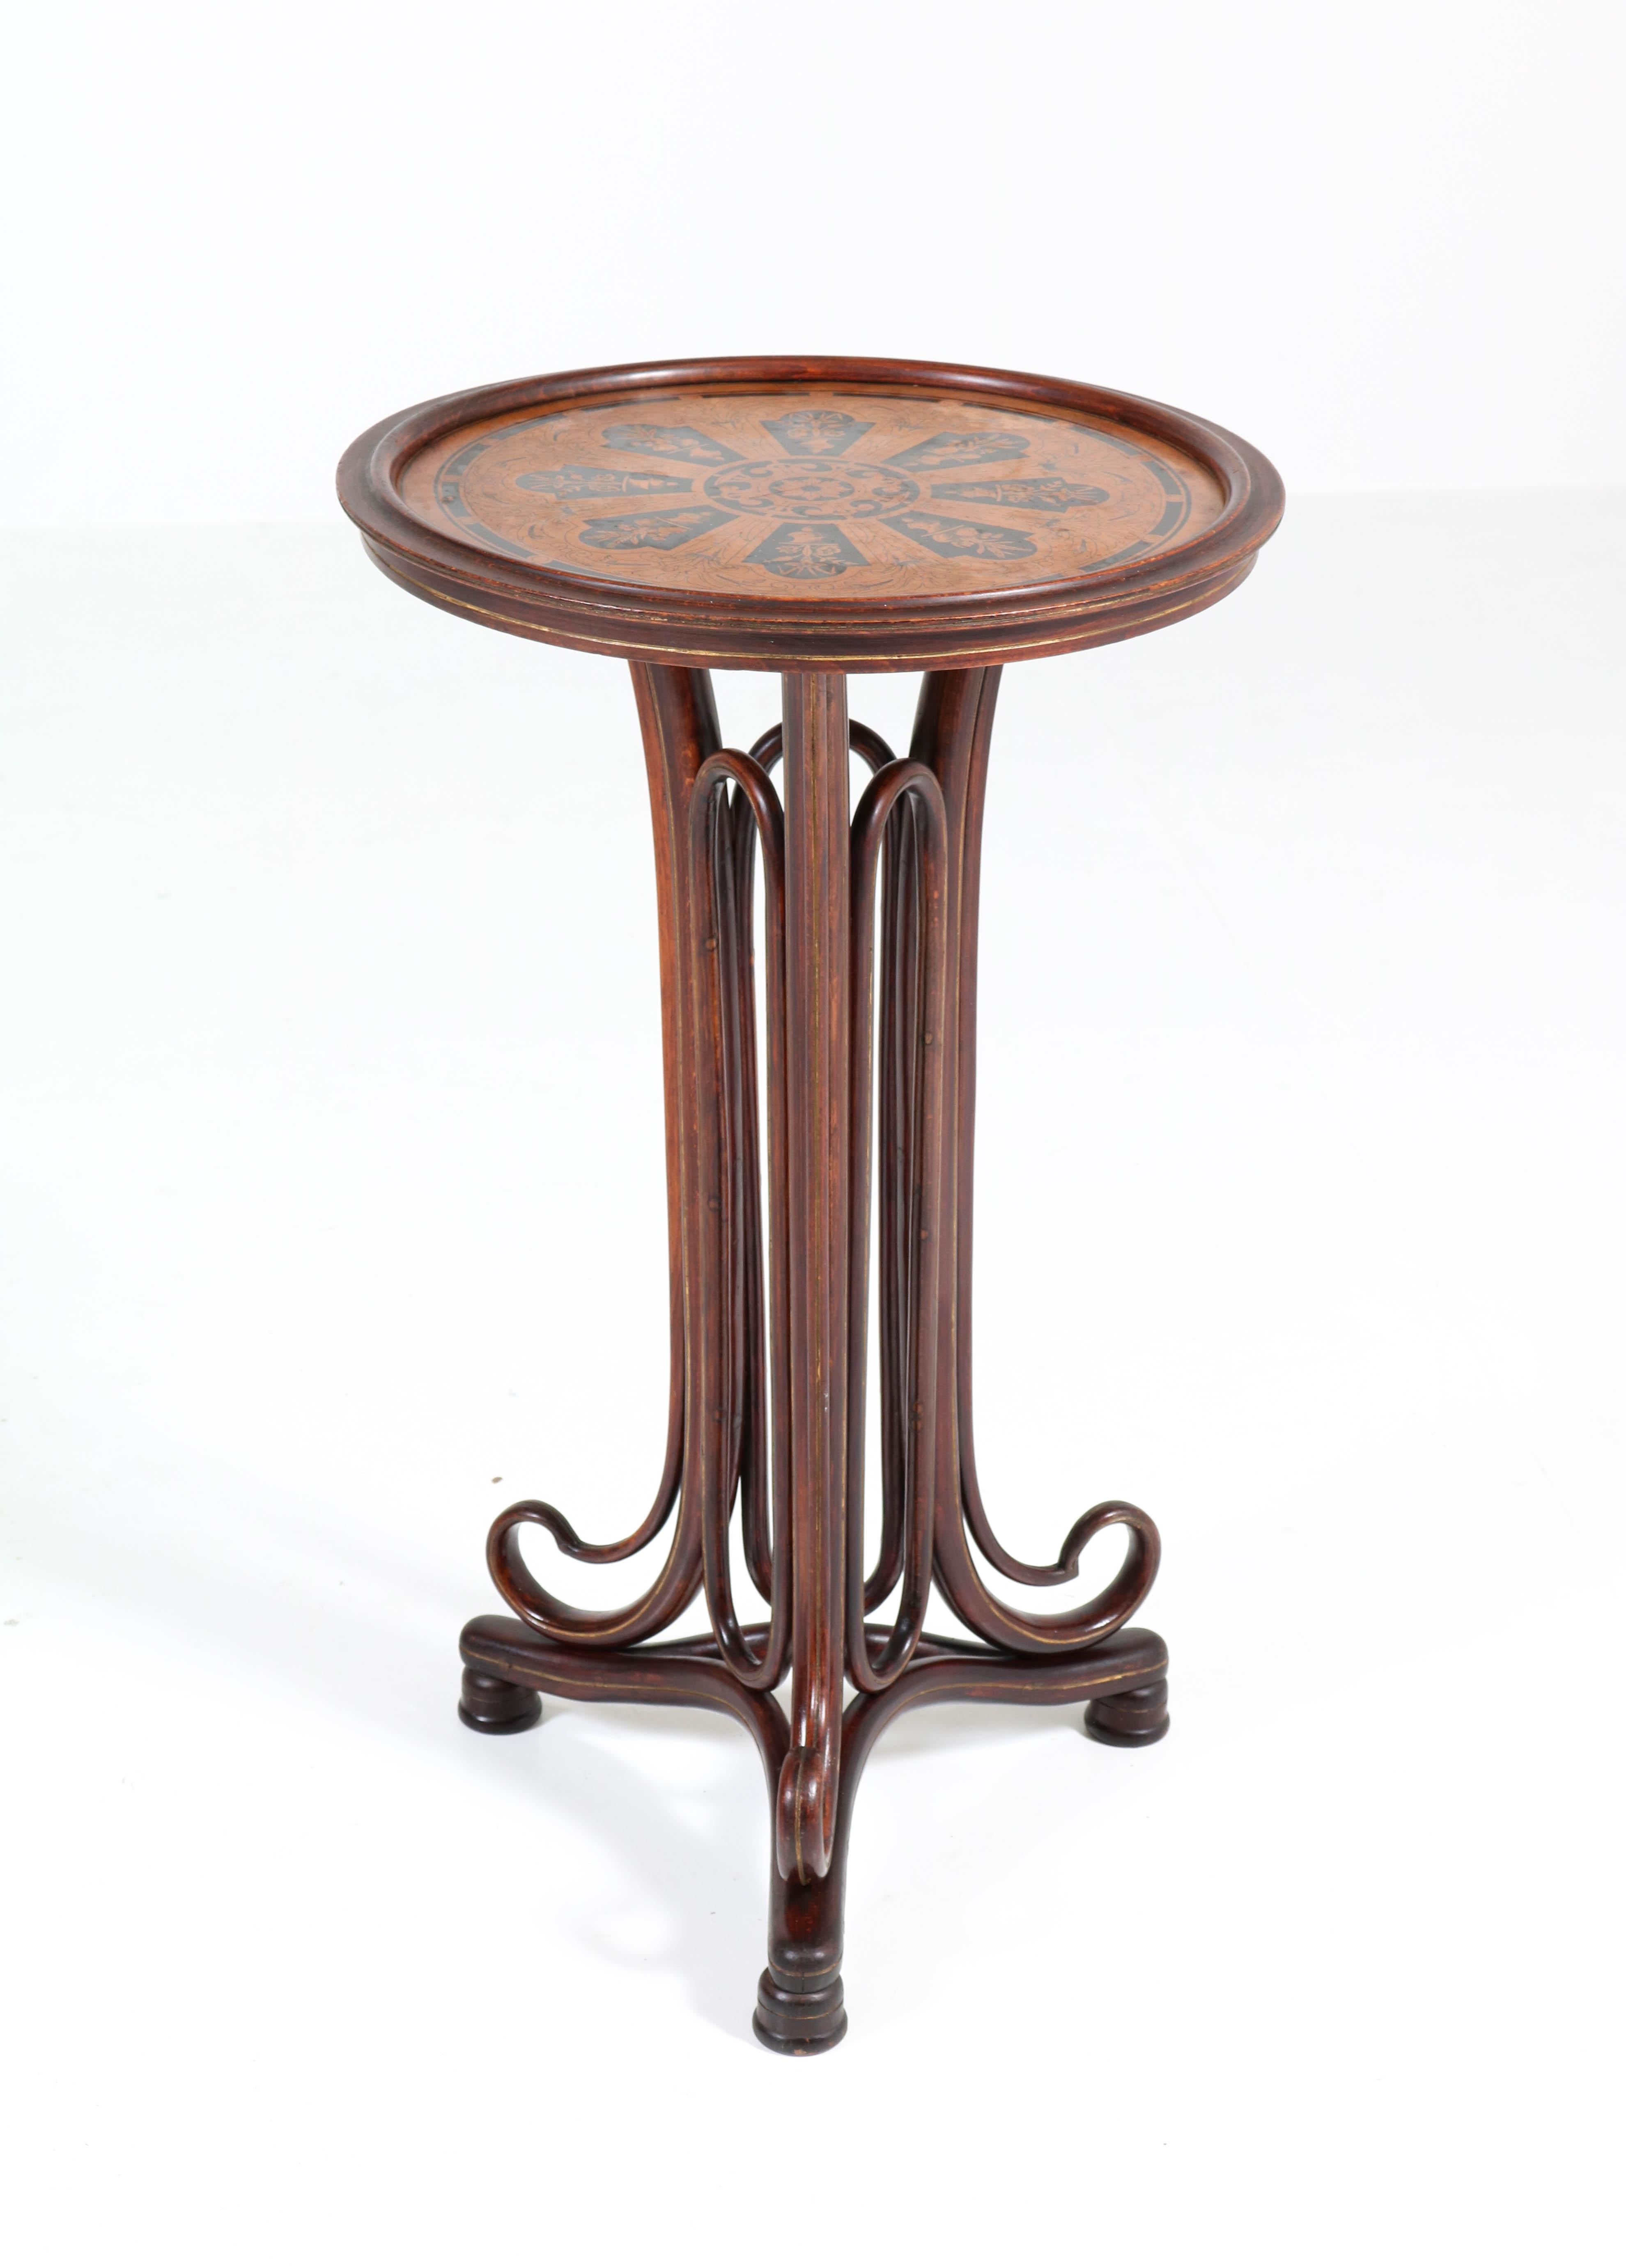 Wonderful and very rare Art Nouveau reading table.
Striking design by Thonet, Austria, 1880s.
Bentwood beech frame with original top with inlay.
Marked with original paper label, see image 11.
In good original condition with minor wear